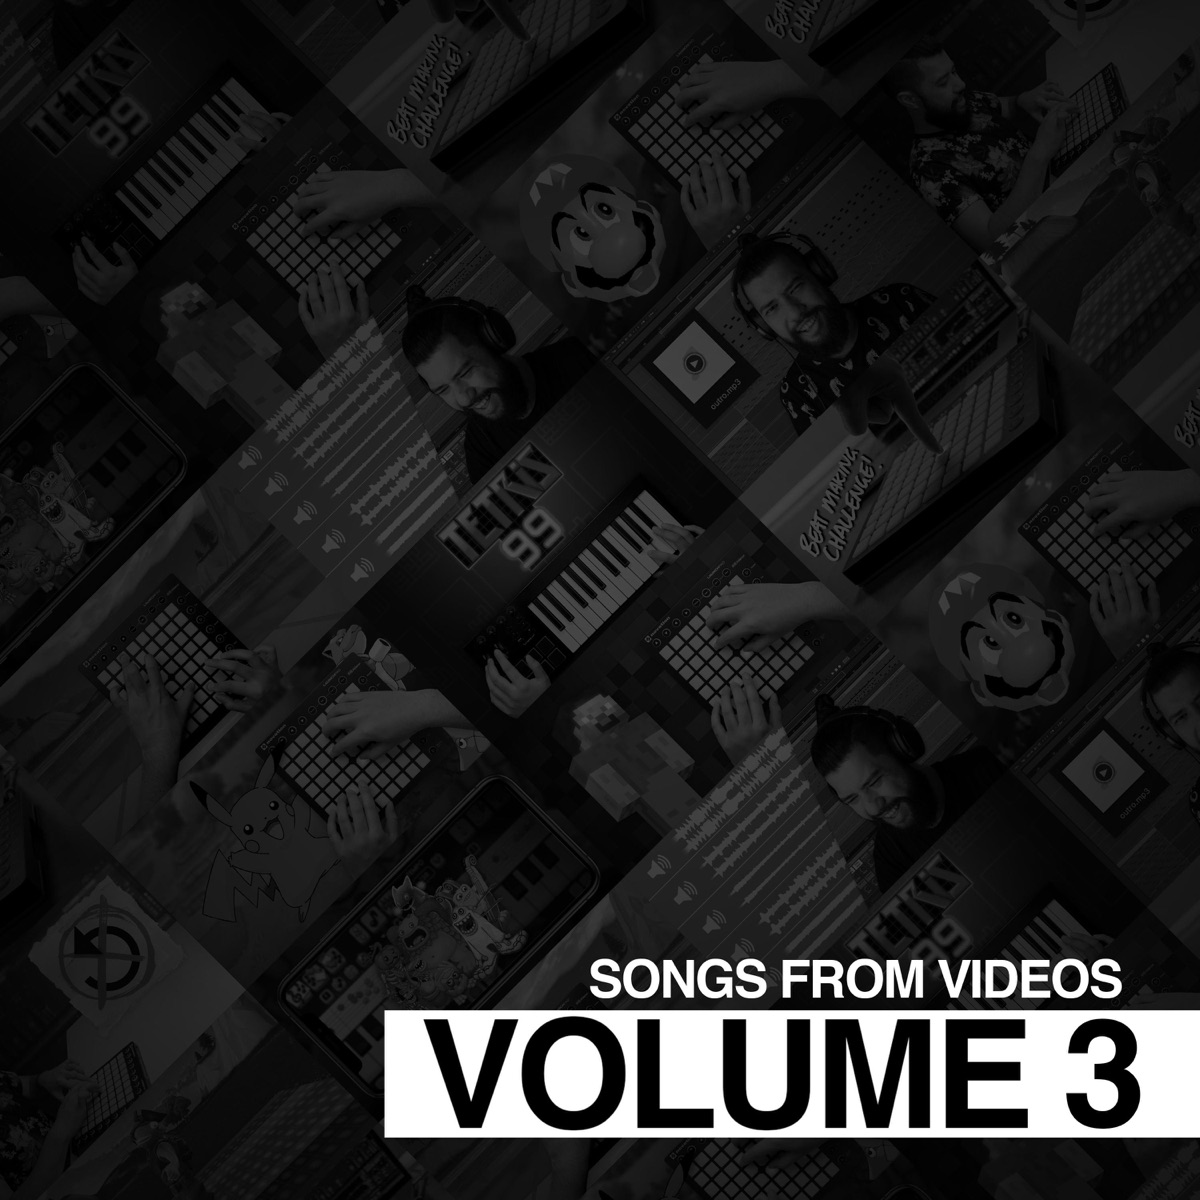 Songs from Videos: 1 by Levi on Apple Music